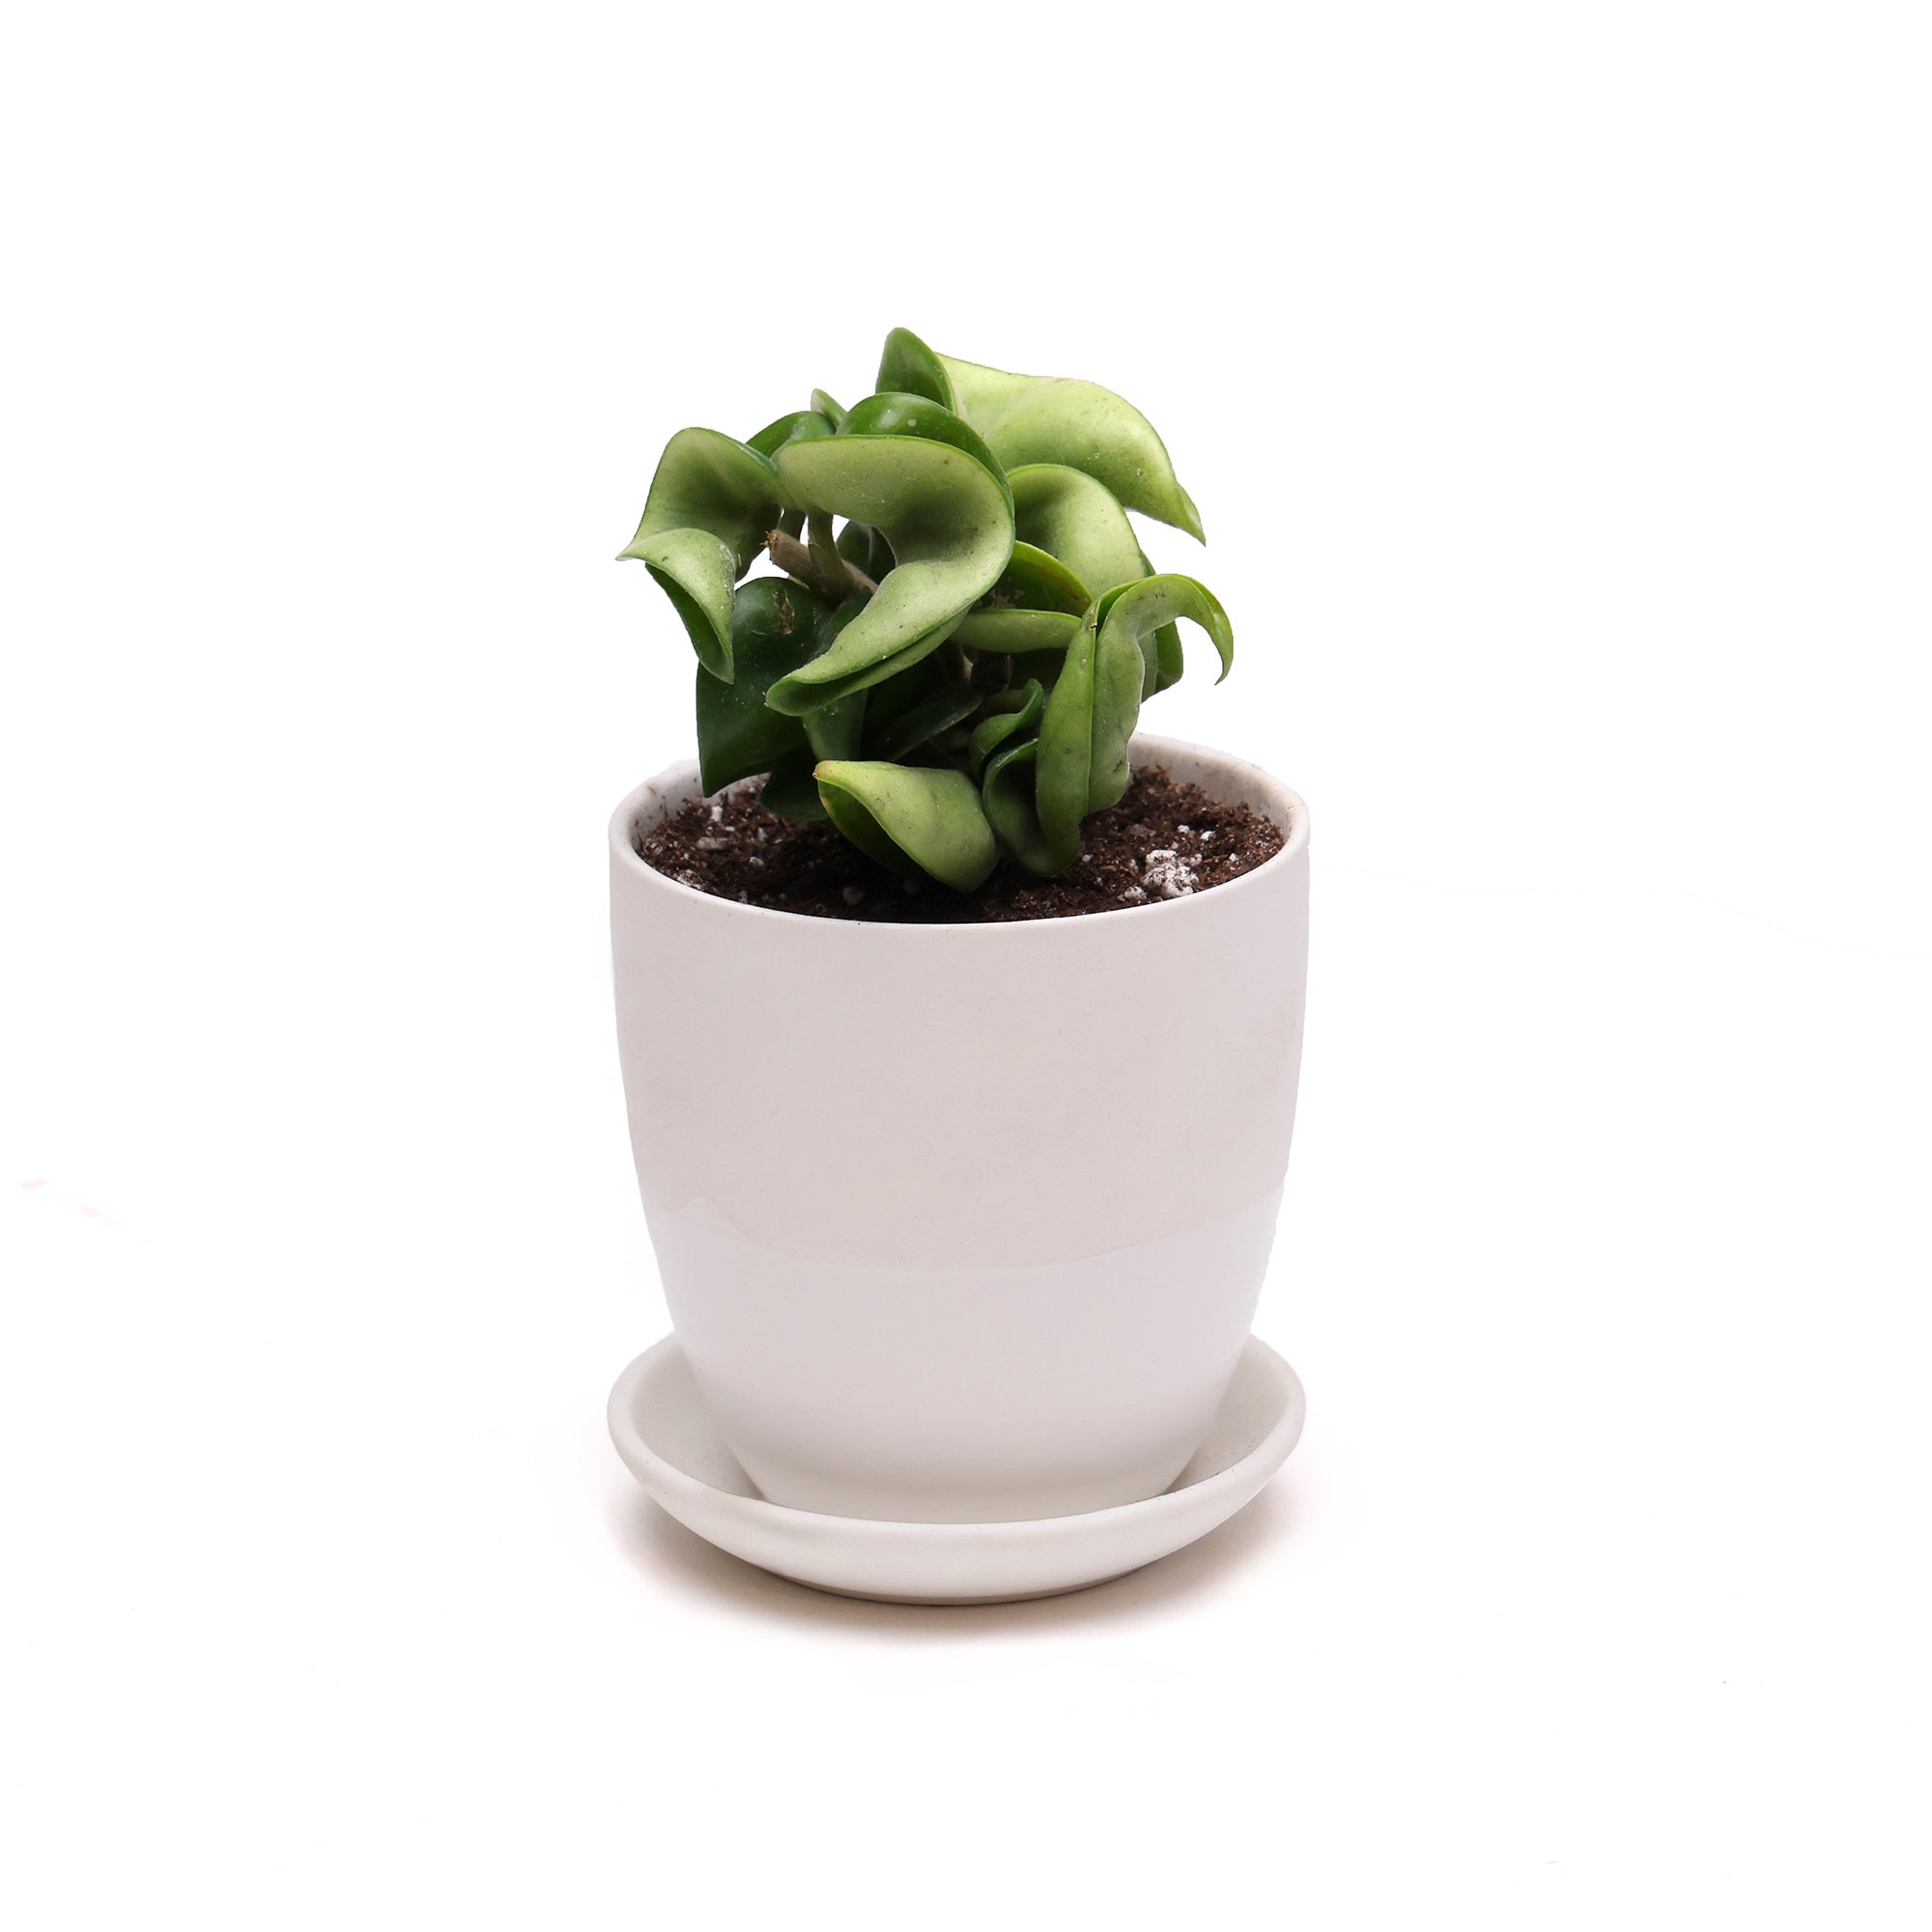 A green succulent plant with plump leaves growing in a Potted Hoya Compacta 3” in Dyad pot with a matching saucer, set against a plain white background by Chive Studio.